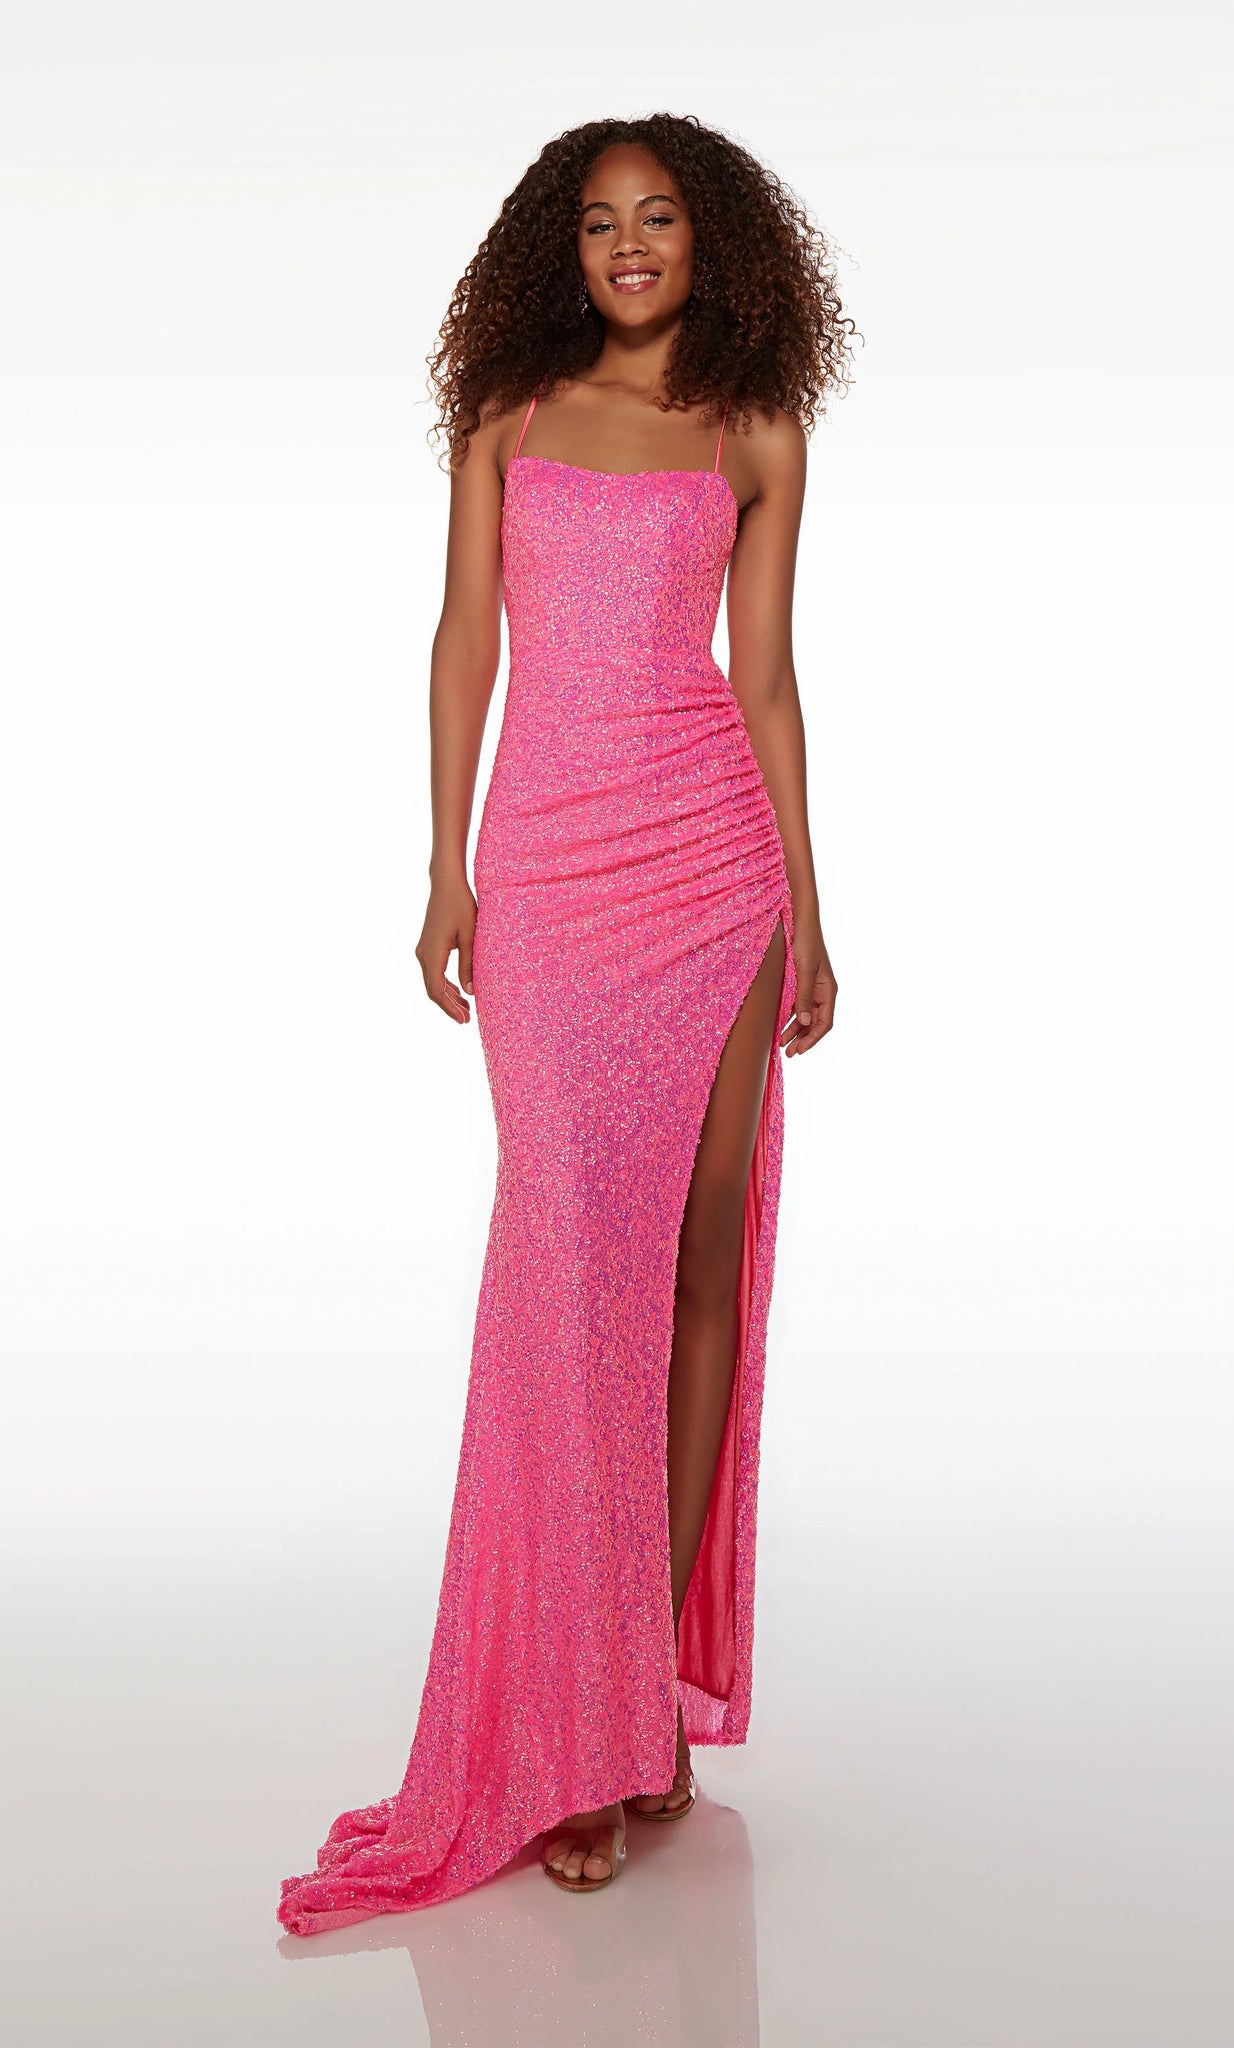 Shimmer onto the dance floor in this phenomenal fully sequined Alyce Paris dress 61519. Fun and flirty, this gorgeous gown features a chic scoop neckline and dainty thin straps. The flattering lace up closure accentuates your curves highlighting your figure beautifully. The slim fitted skirt highlights an alluring high slit perfect for a grand exit.